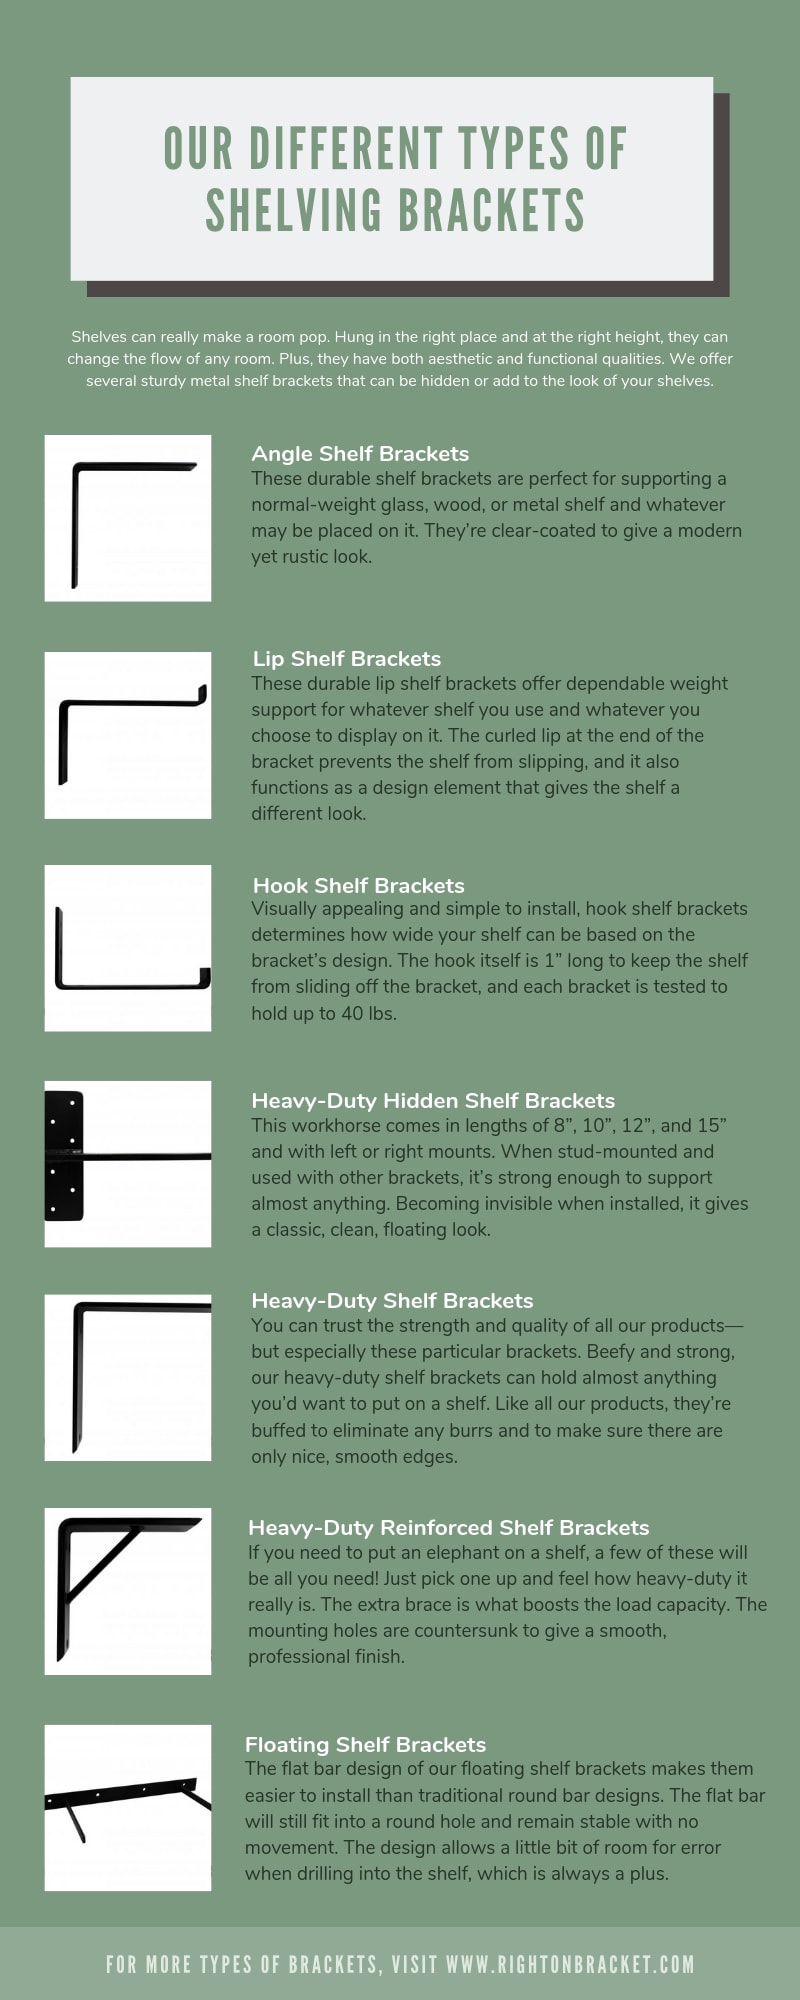 Our Different Types of Wall and Countertop Brackets infographic